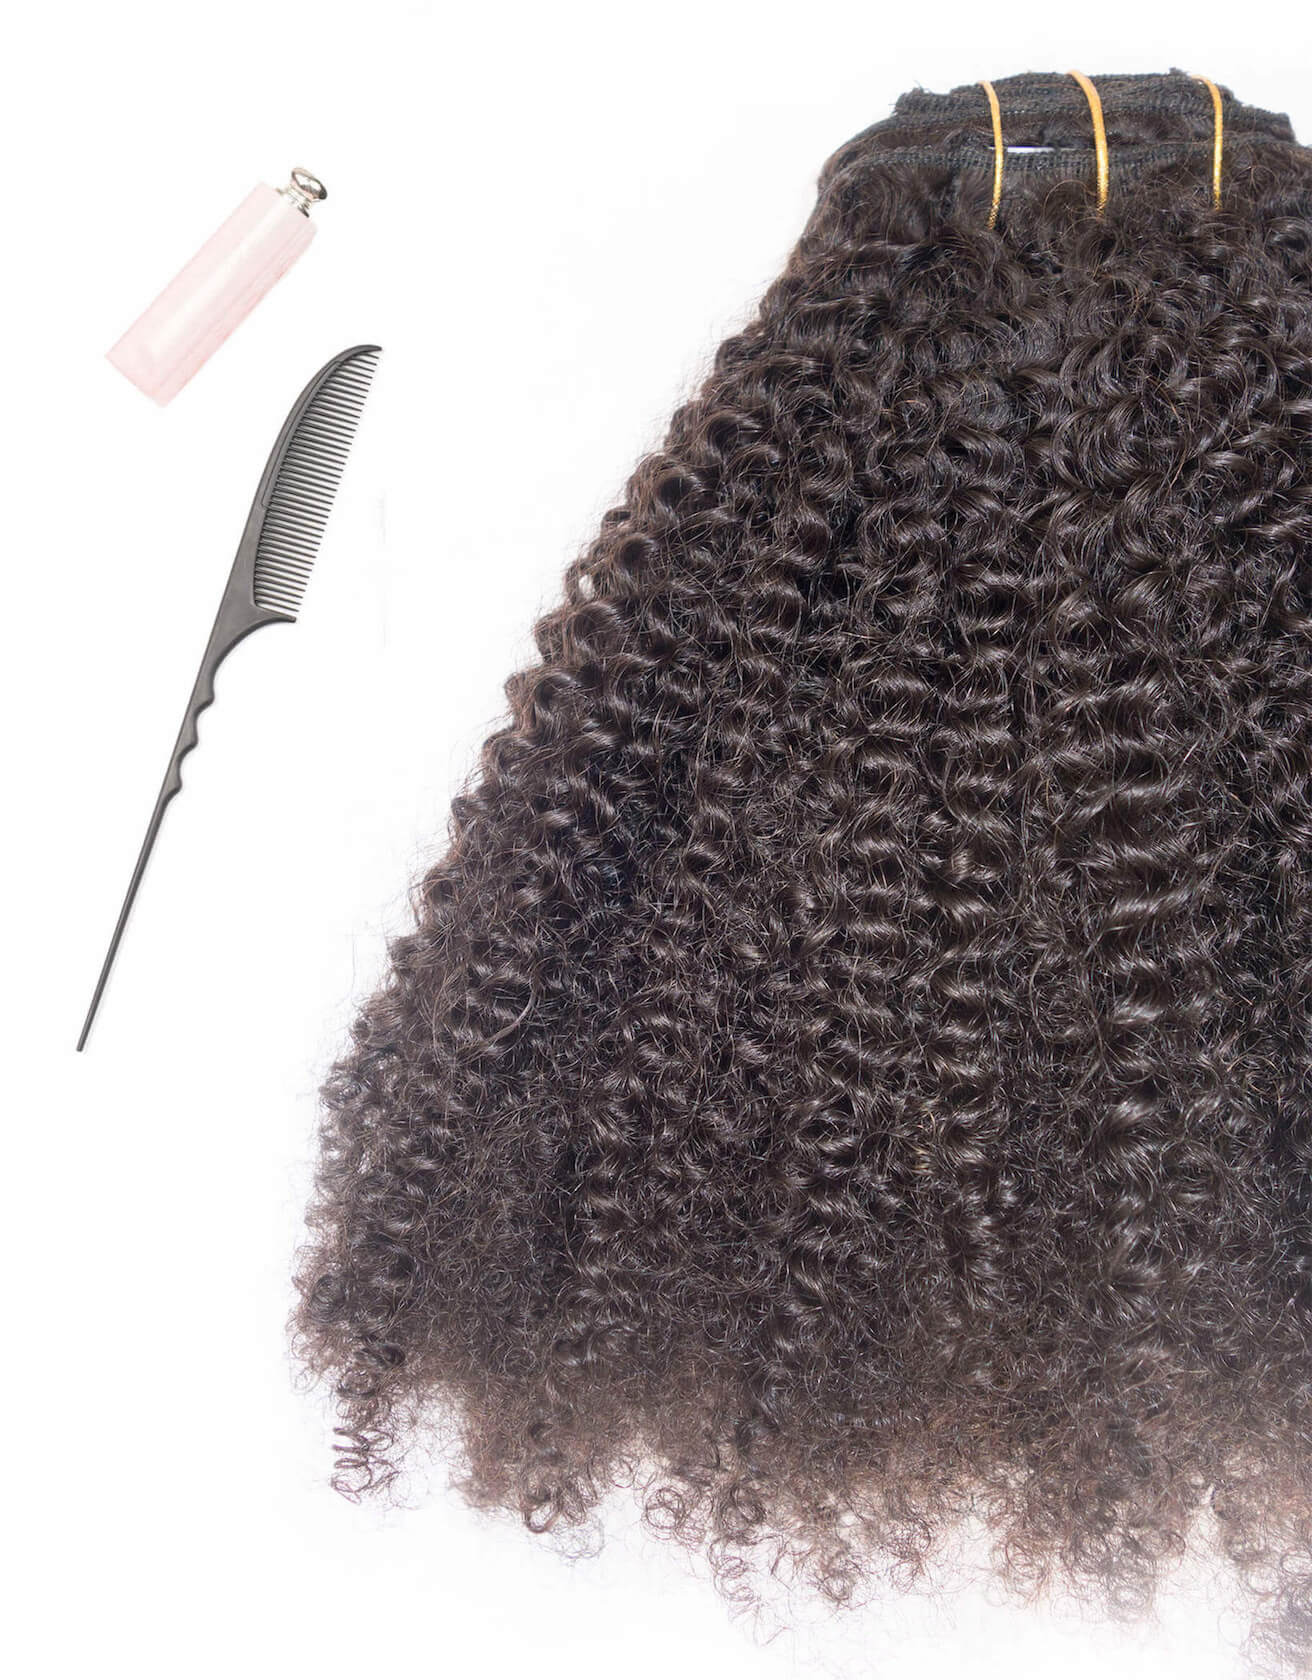 Afro Kinky Curly Clip In Hair Extensions | 3c-4a Natural Hair : BetterLength